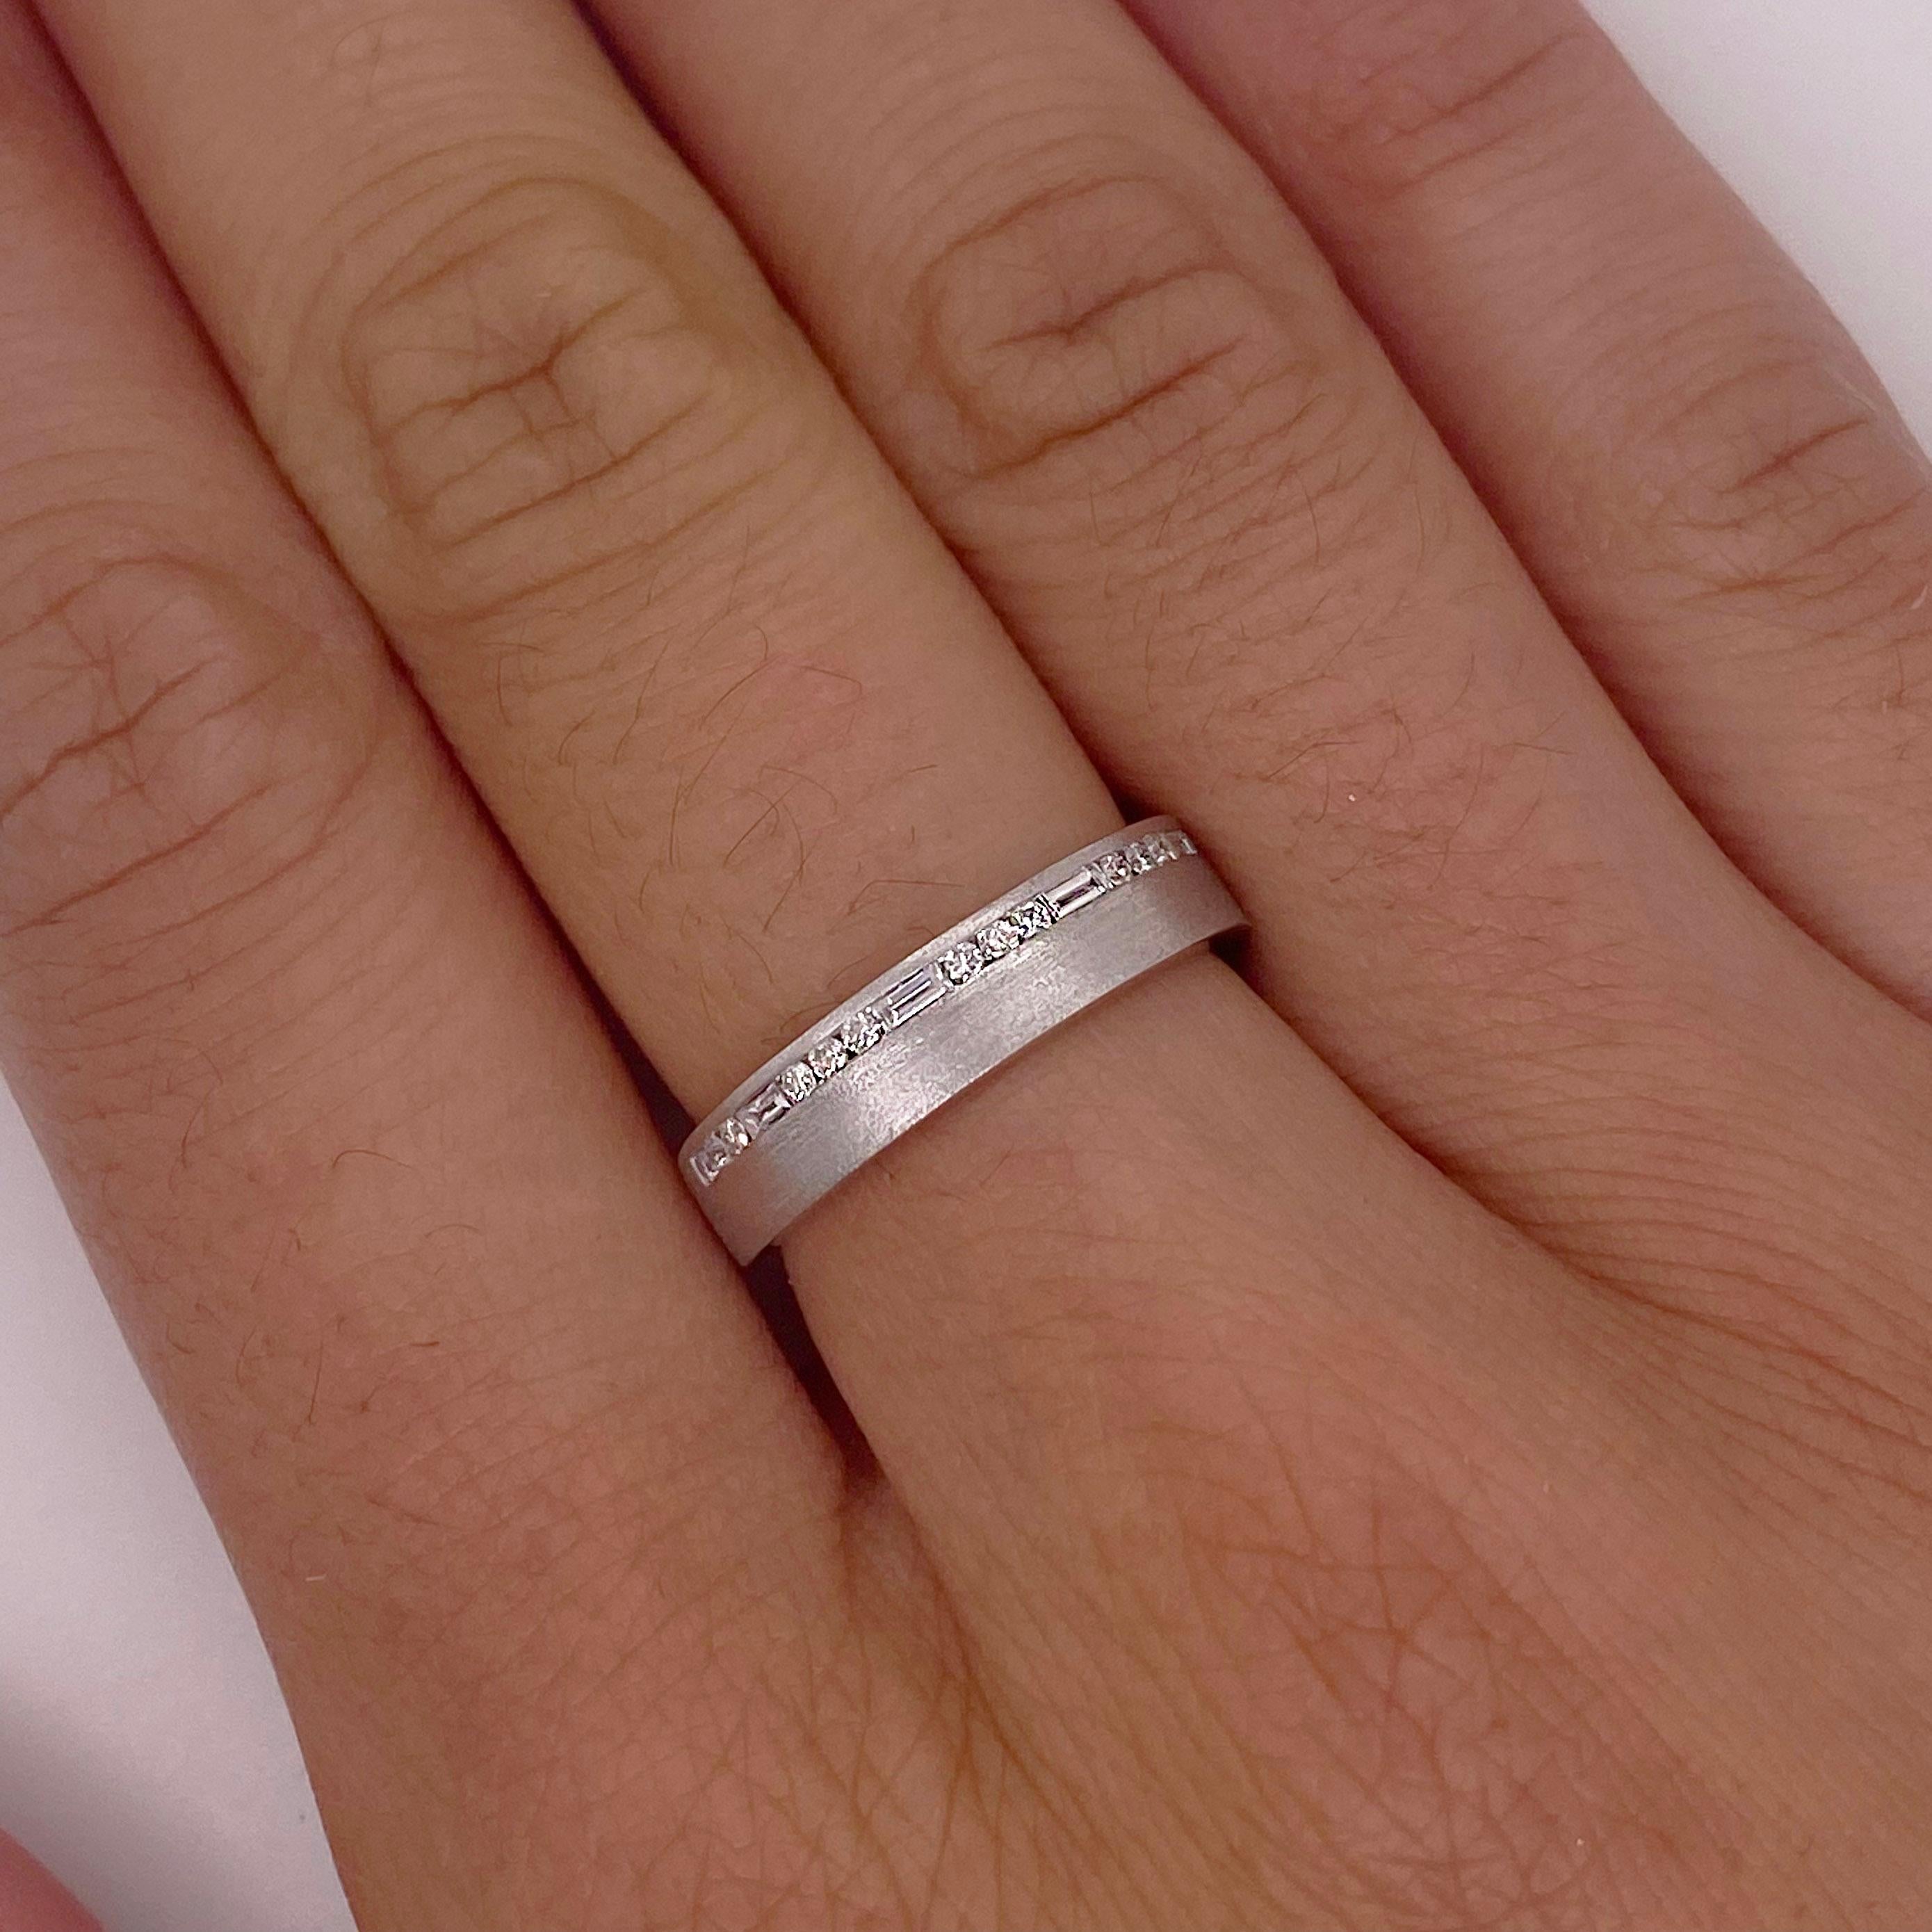 For Sale:  Channel Set Diamond Band, .23ct Diamond Band, 14K White Gold with Satin Finish 4